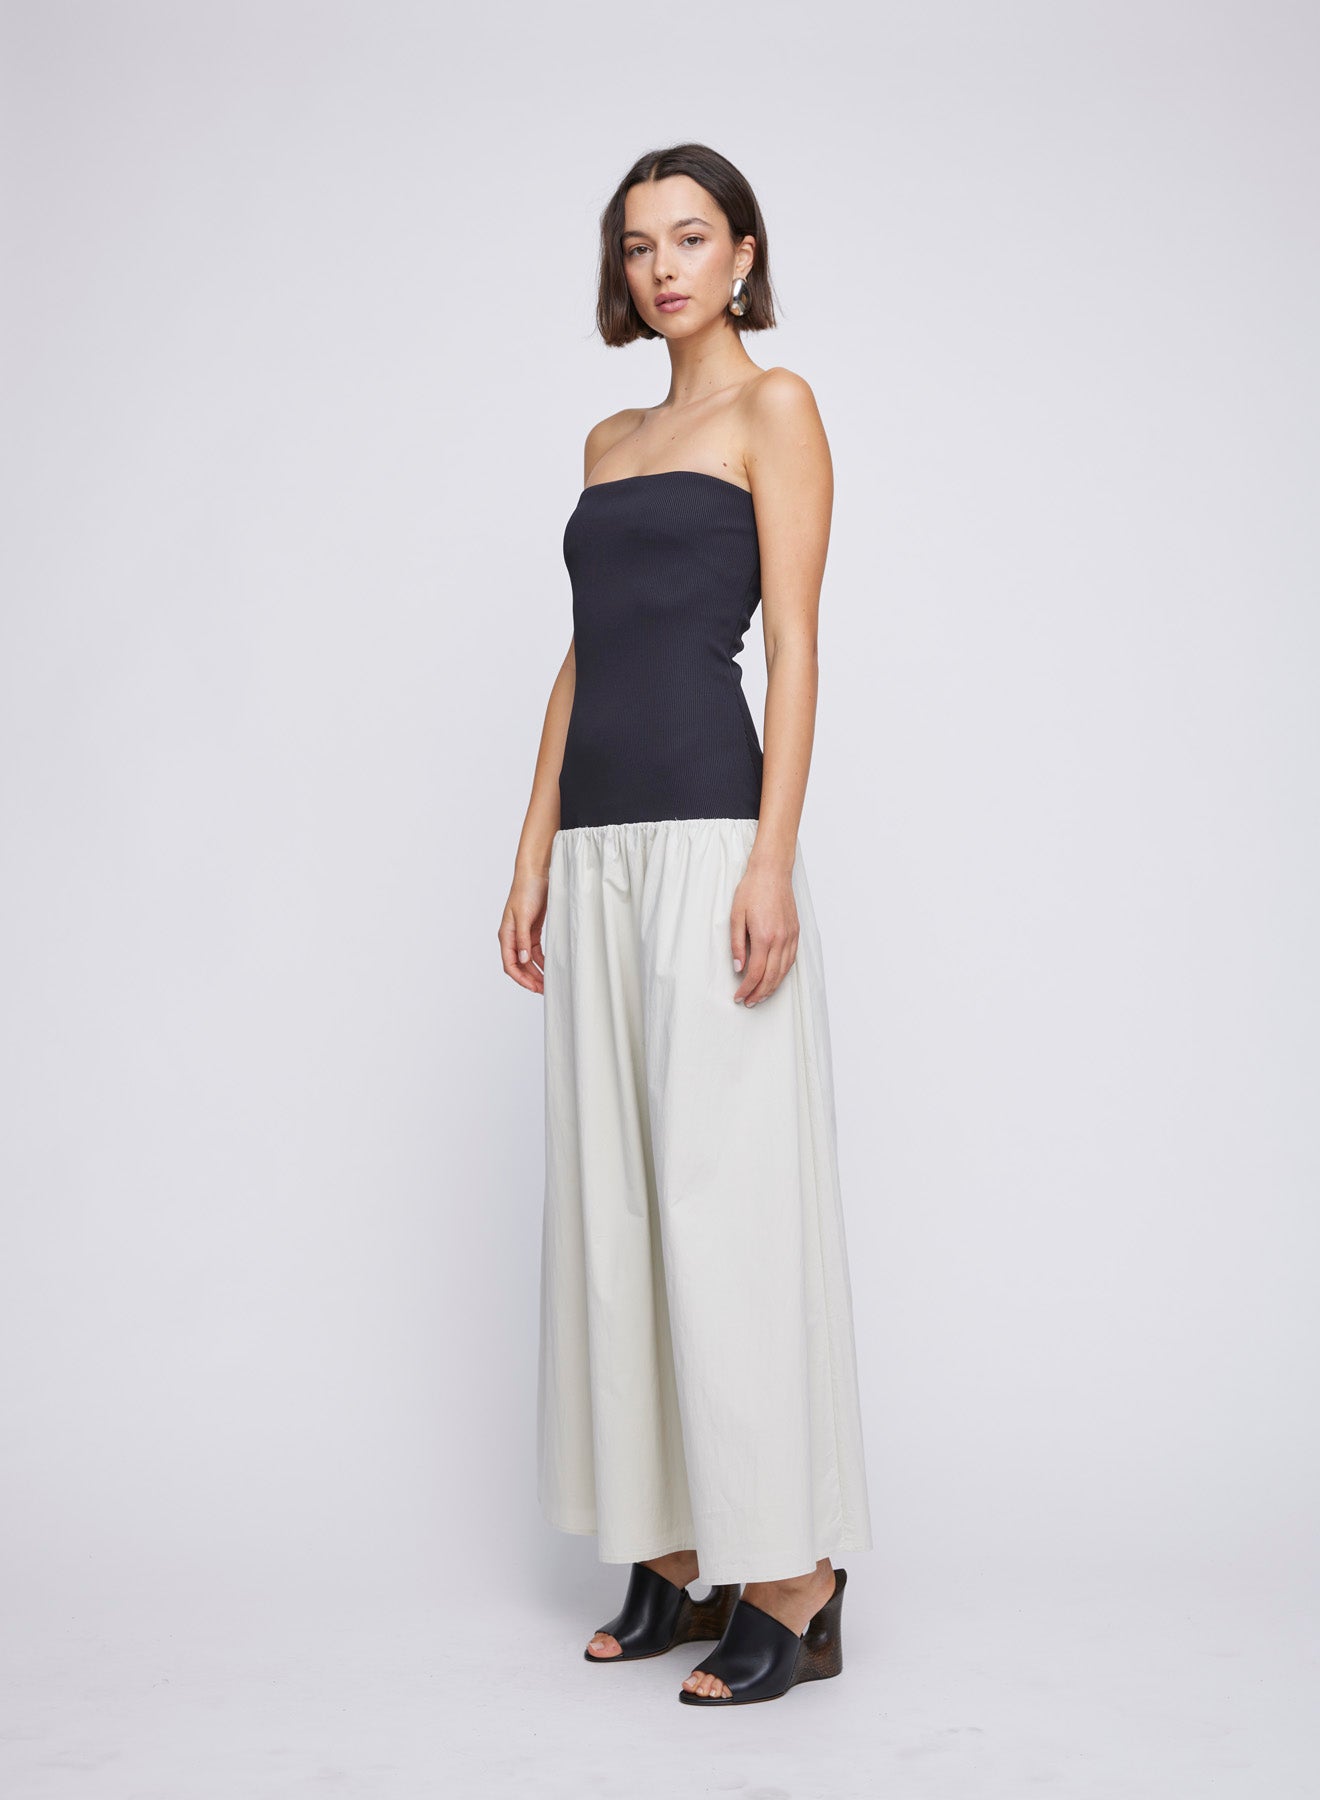 Mix-media cotton poplin and jersey rib strapless maxi dress with drop waist. Day dresses, day dress, going out dress, ANNA QUAN dresses, mixed media dresses, mixed media dress.